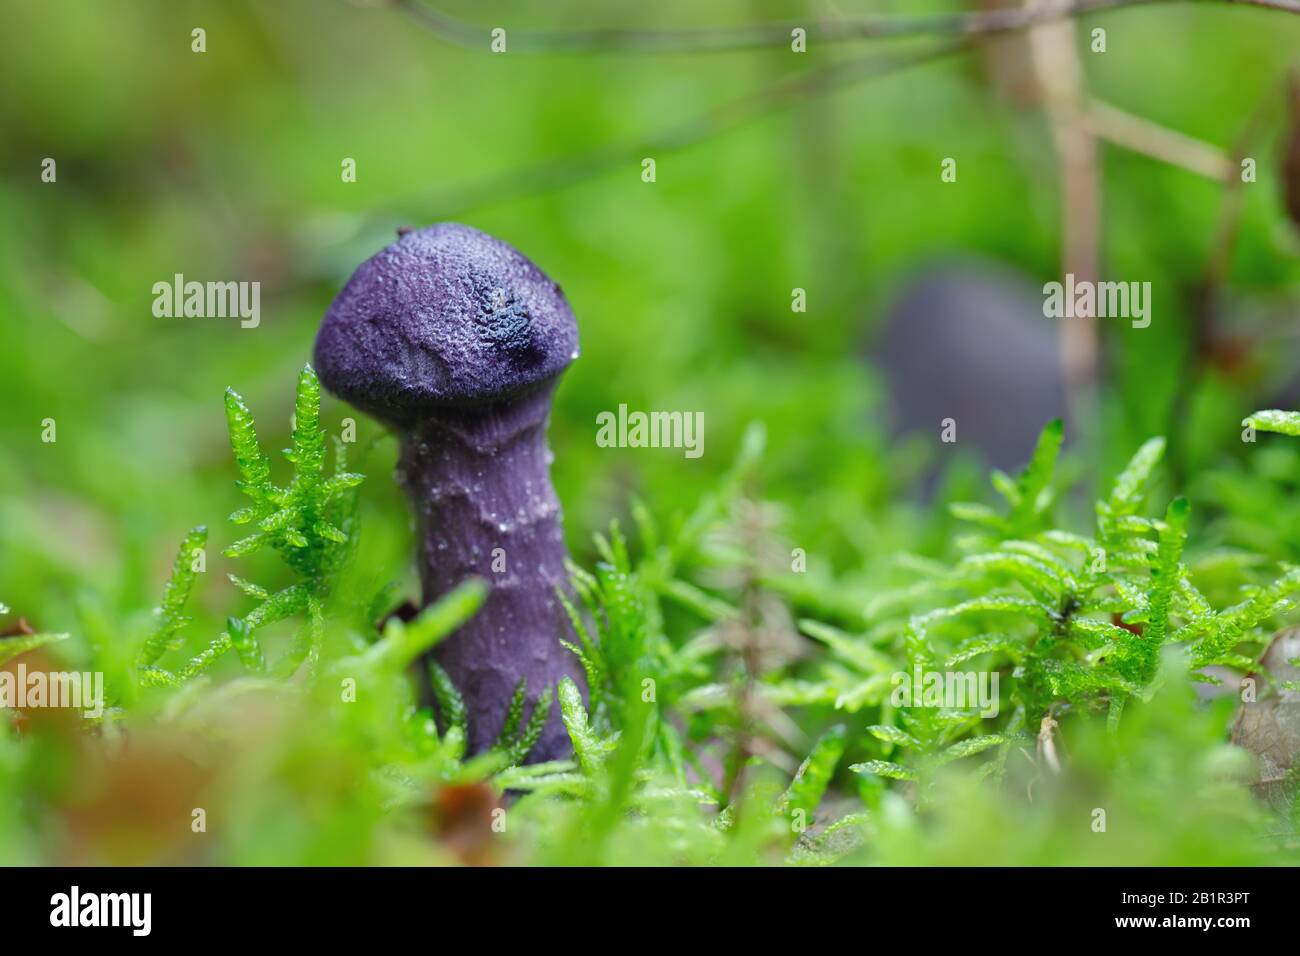 Young Violet Webcap mushroom growing in the wet moss of a temperate forest. Stock Photo